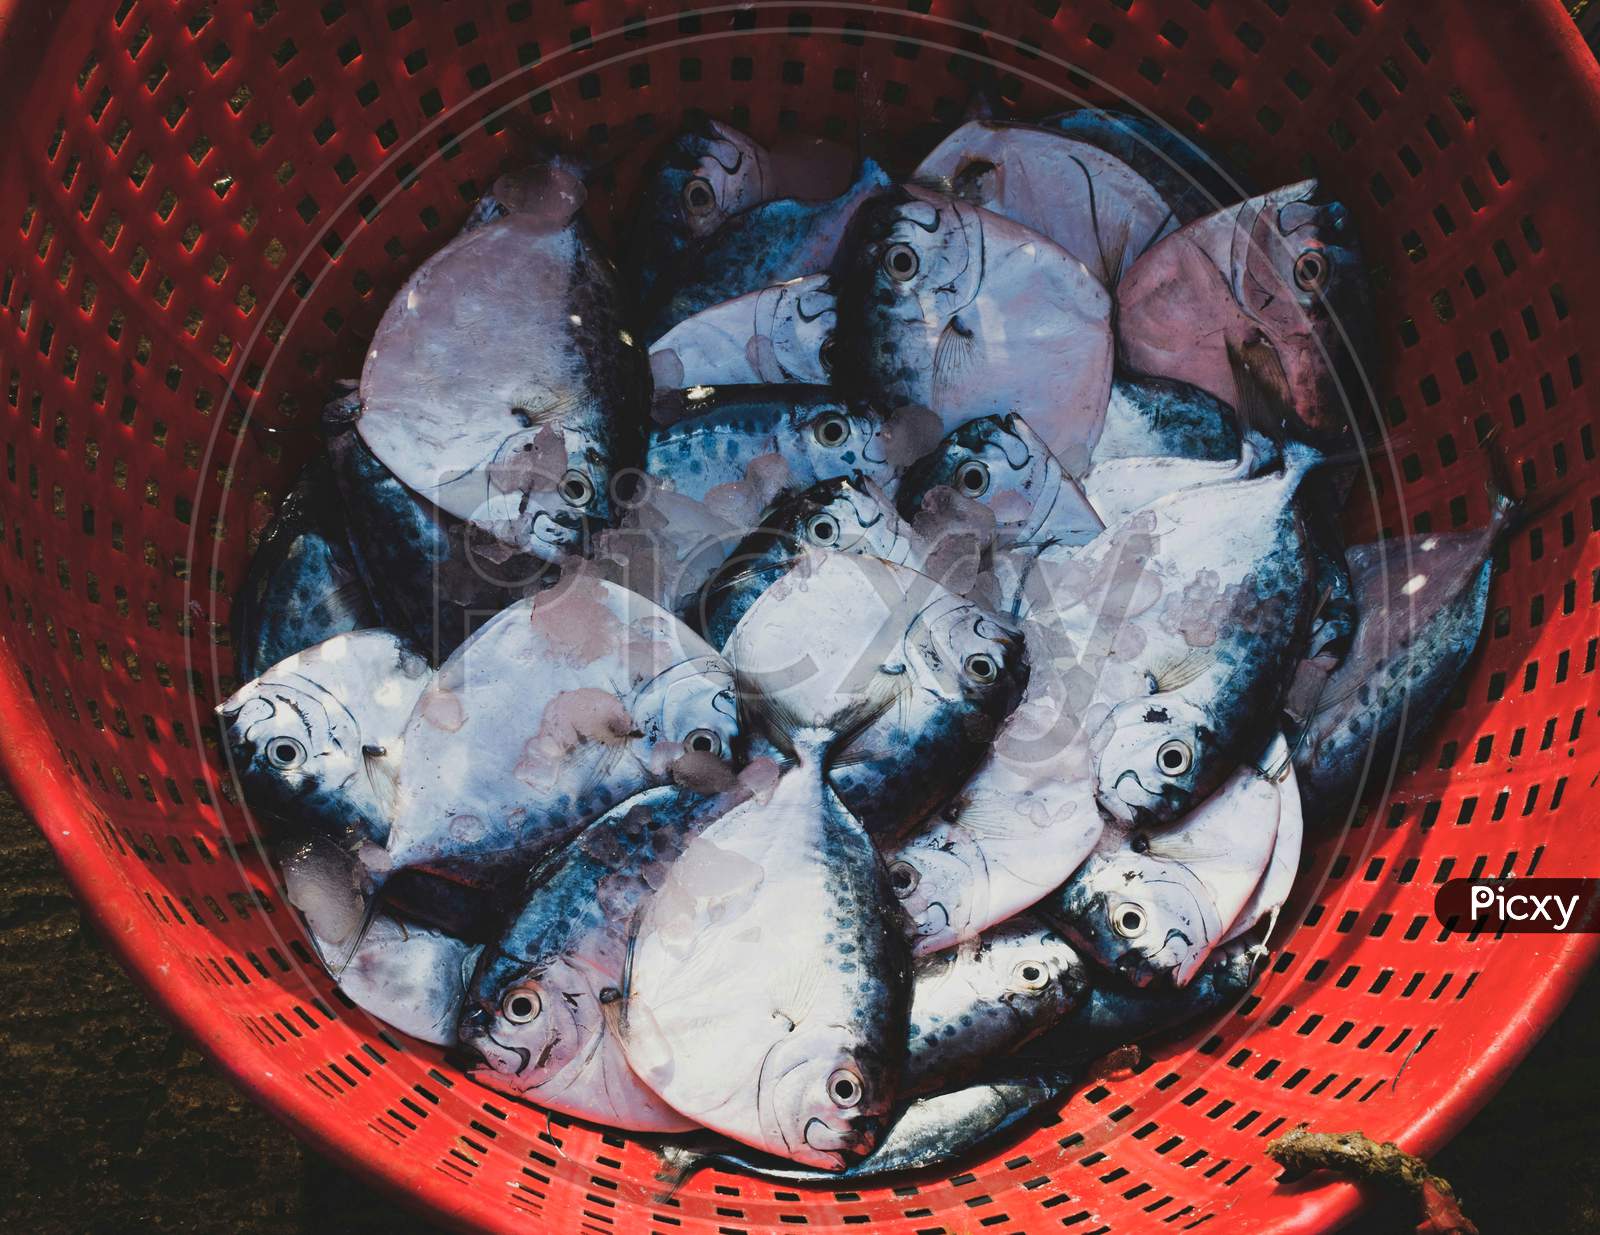 Collection Of Razor Moonfish On A Container For Sale.